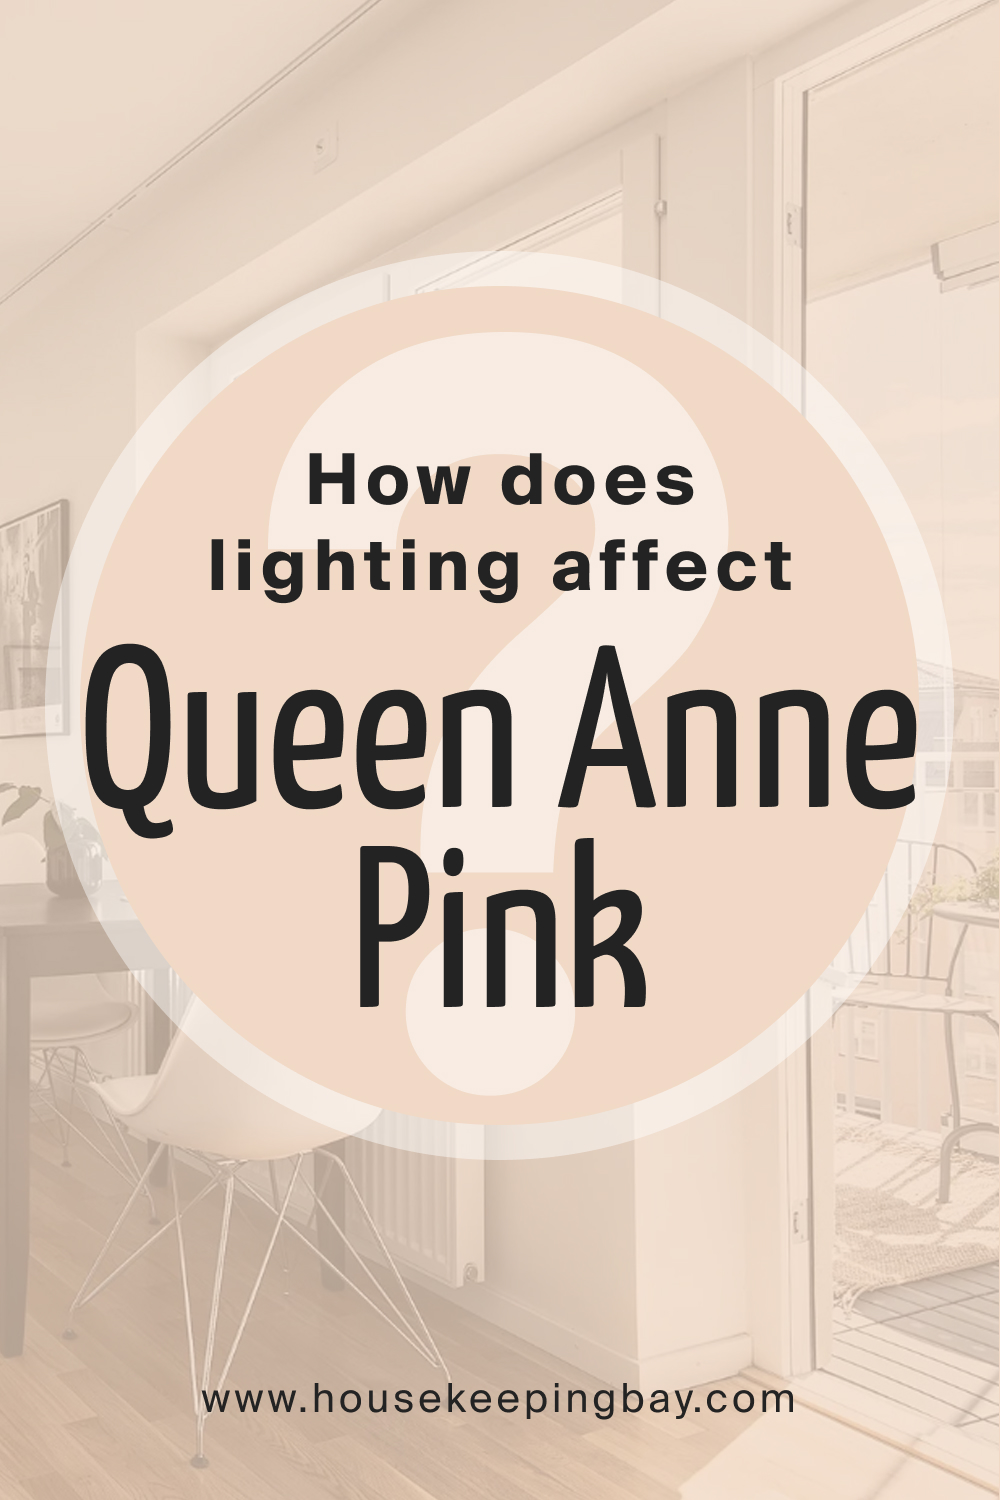 How Does Lighting Affect Queen Anne Pink HC-60?